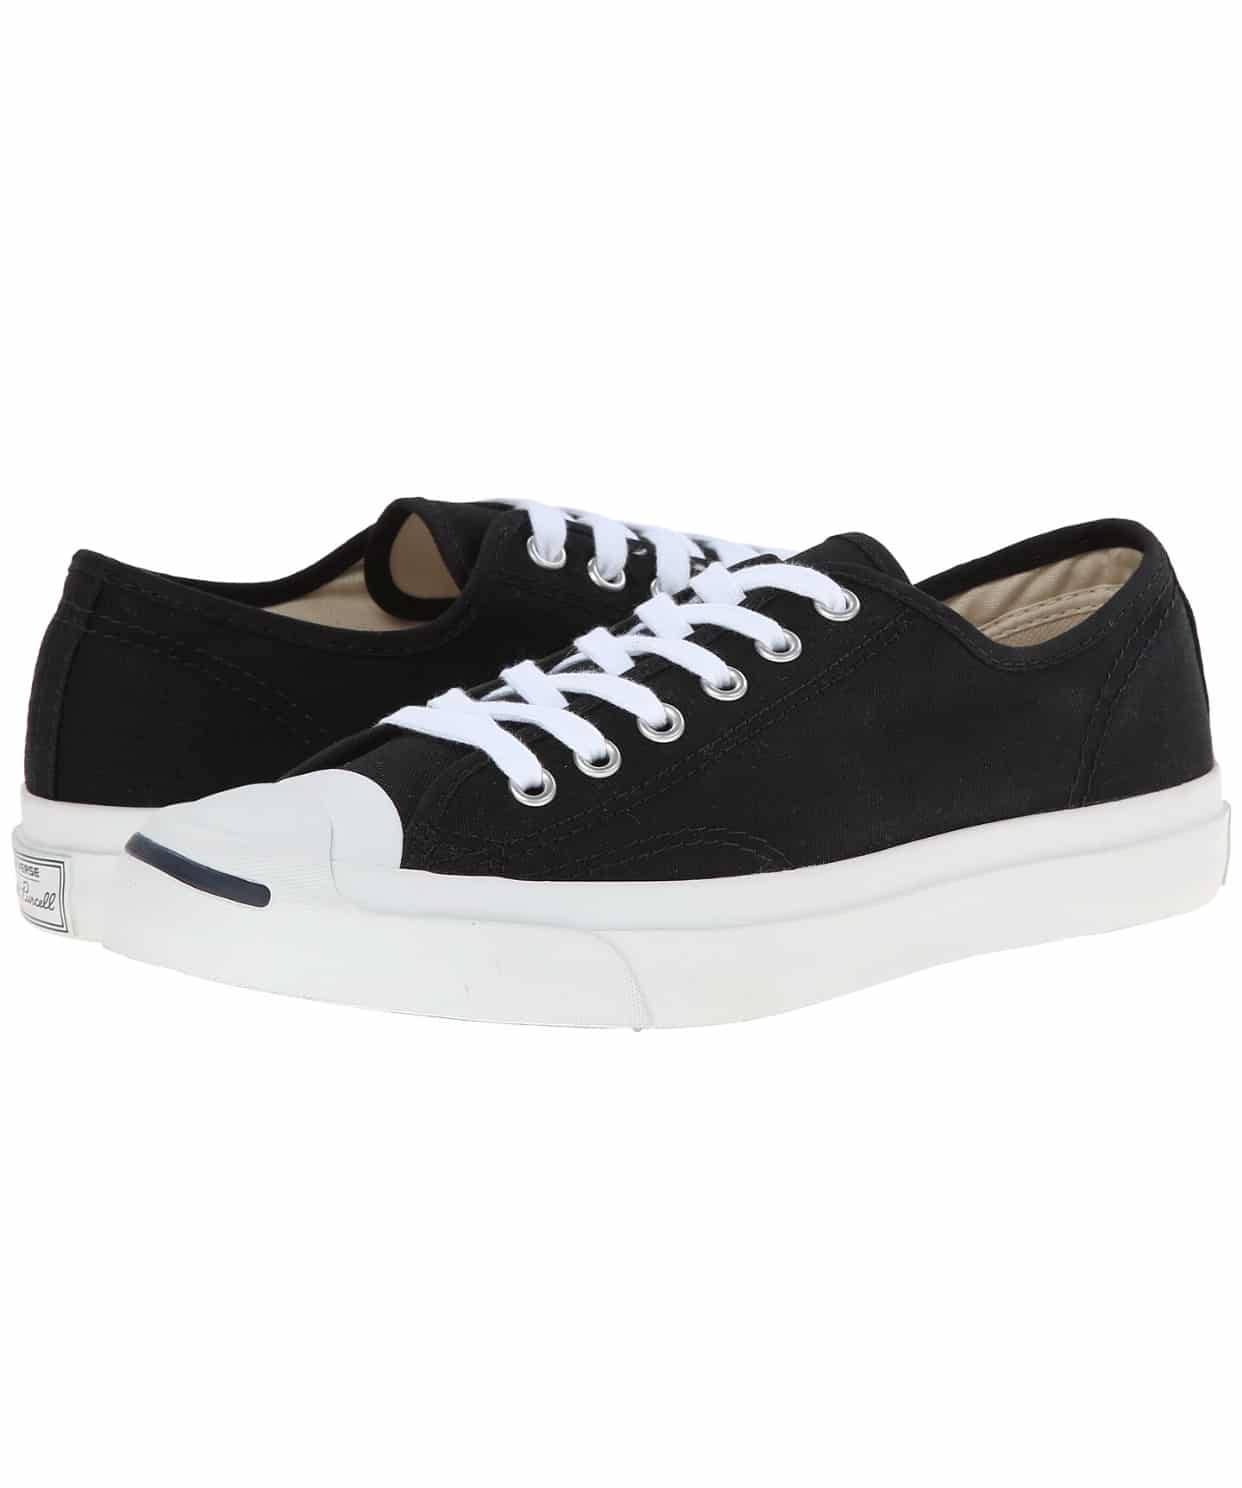 Zappos.com : Converse Jack Purcell® CP 